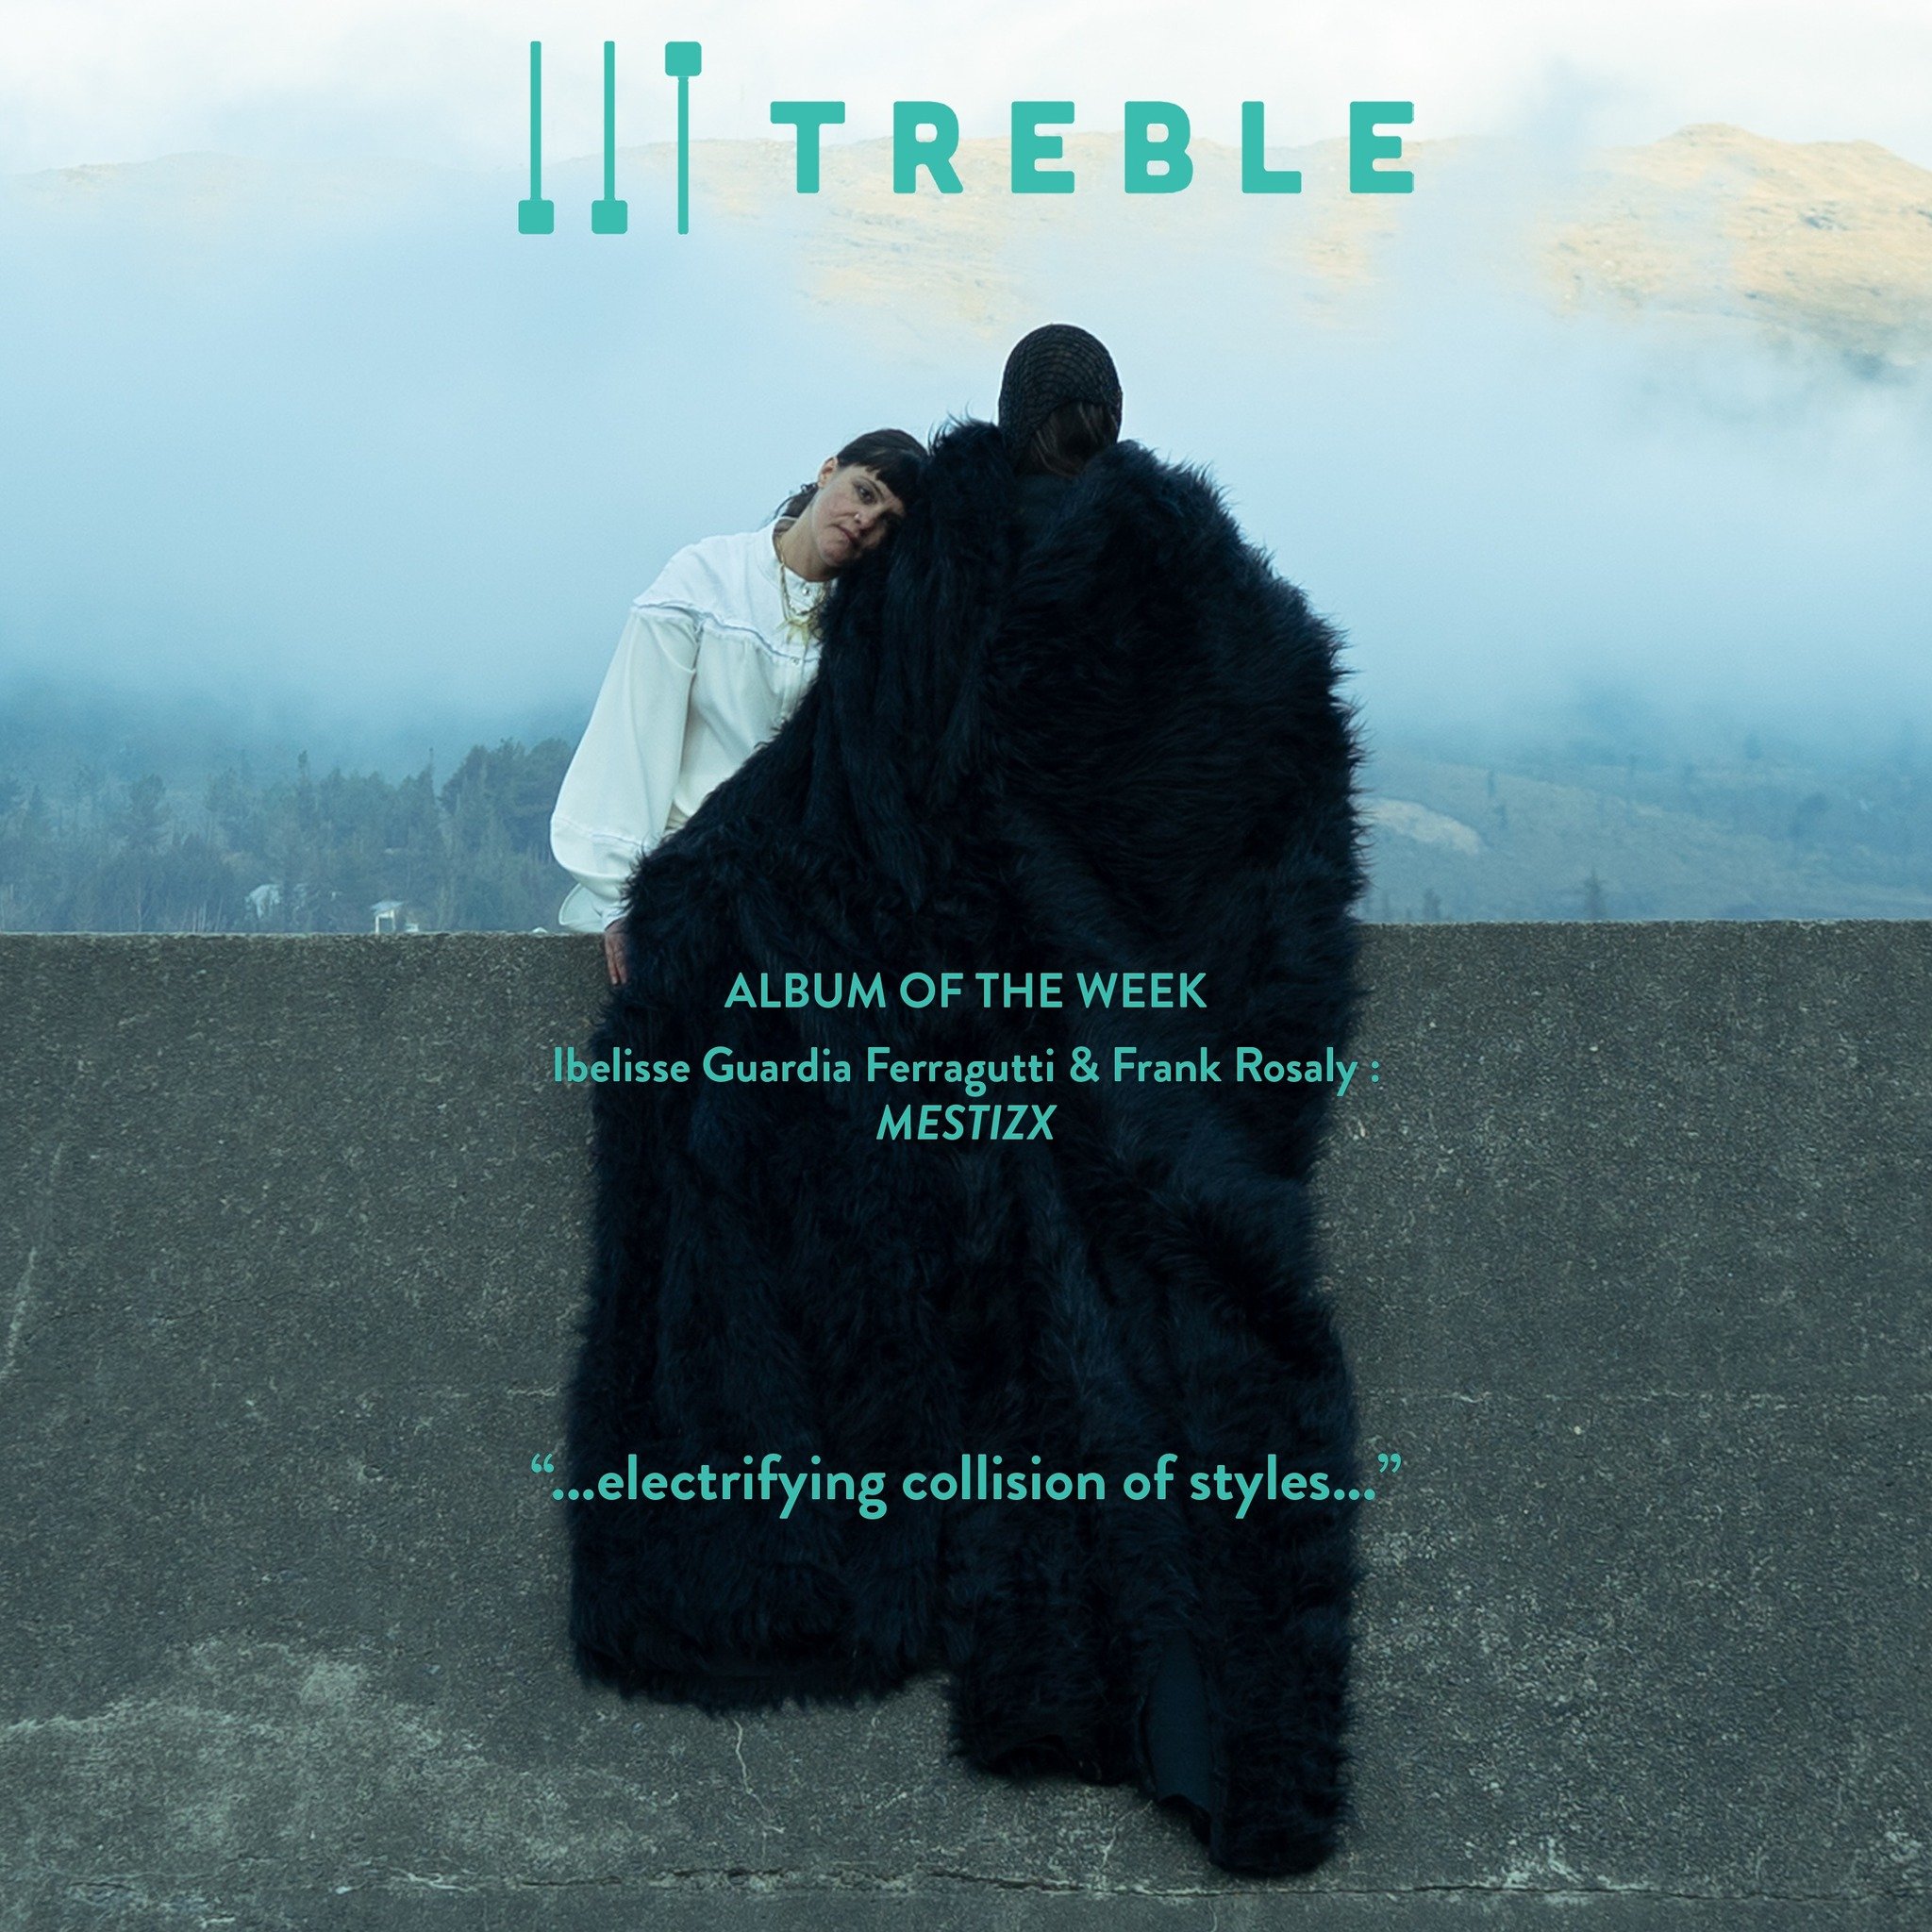 @ibelisseguardiaferragutti &amp; @frank_rosaly &lsquo;s 𝙈𝙀𝙎𝙏𝙄𝙕𝙓 is @treblezine &lsquo;s 𝗔𝗟𝗕𝗨𝗠 𝗢𝗙 𝗧𝗛𝗘 𝗪𝗘𝗘𝗞 &lt;3

&ldquo;...through songs in a state of constant movement, 𝘔𝘌𝘚𝘛𝘐𝘡𝘟 finds unlikely and often thrilling connectio